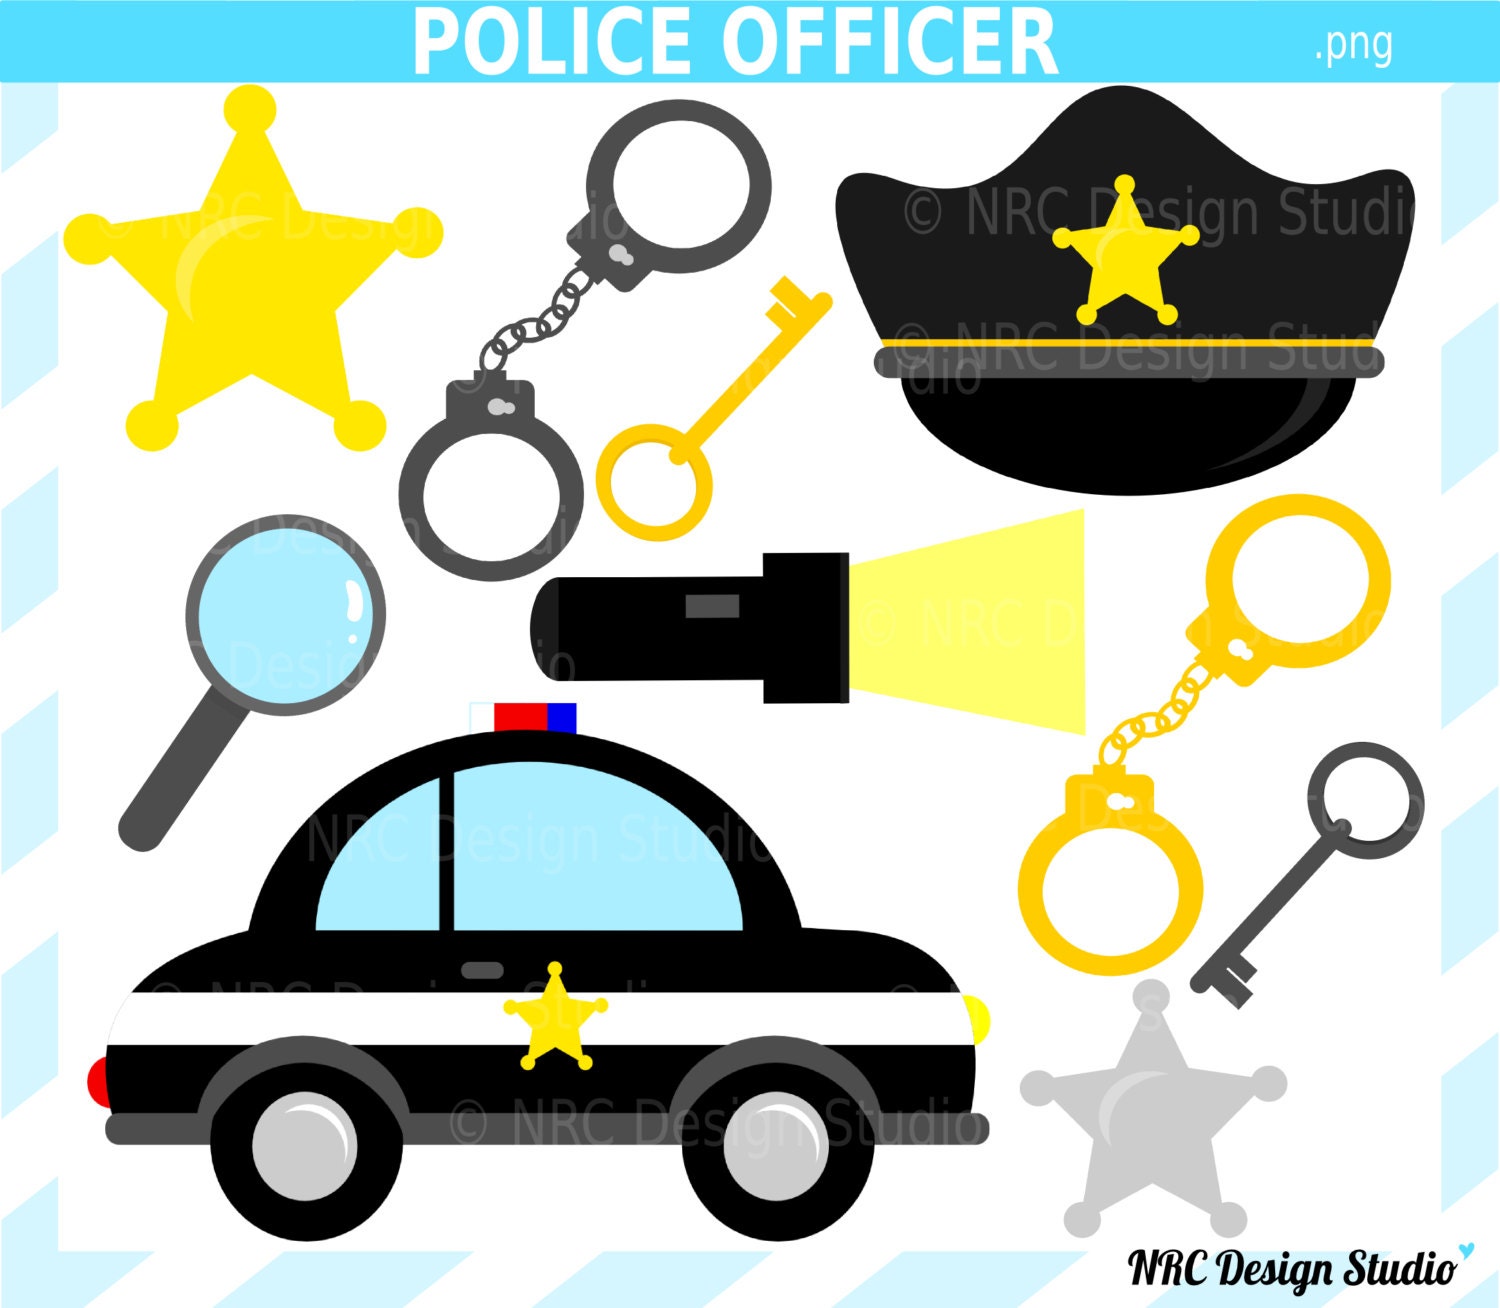 clip art images police officer - photo #42